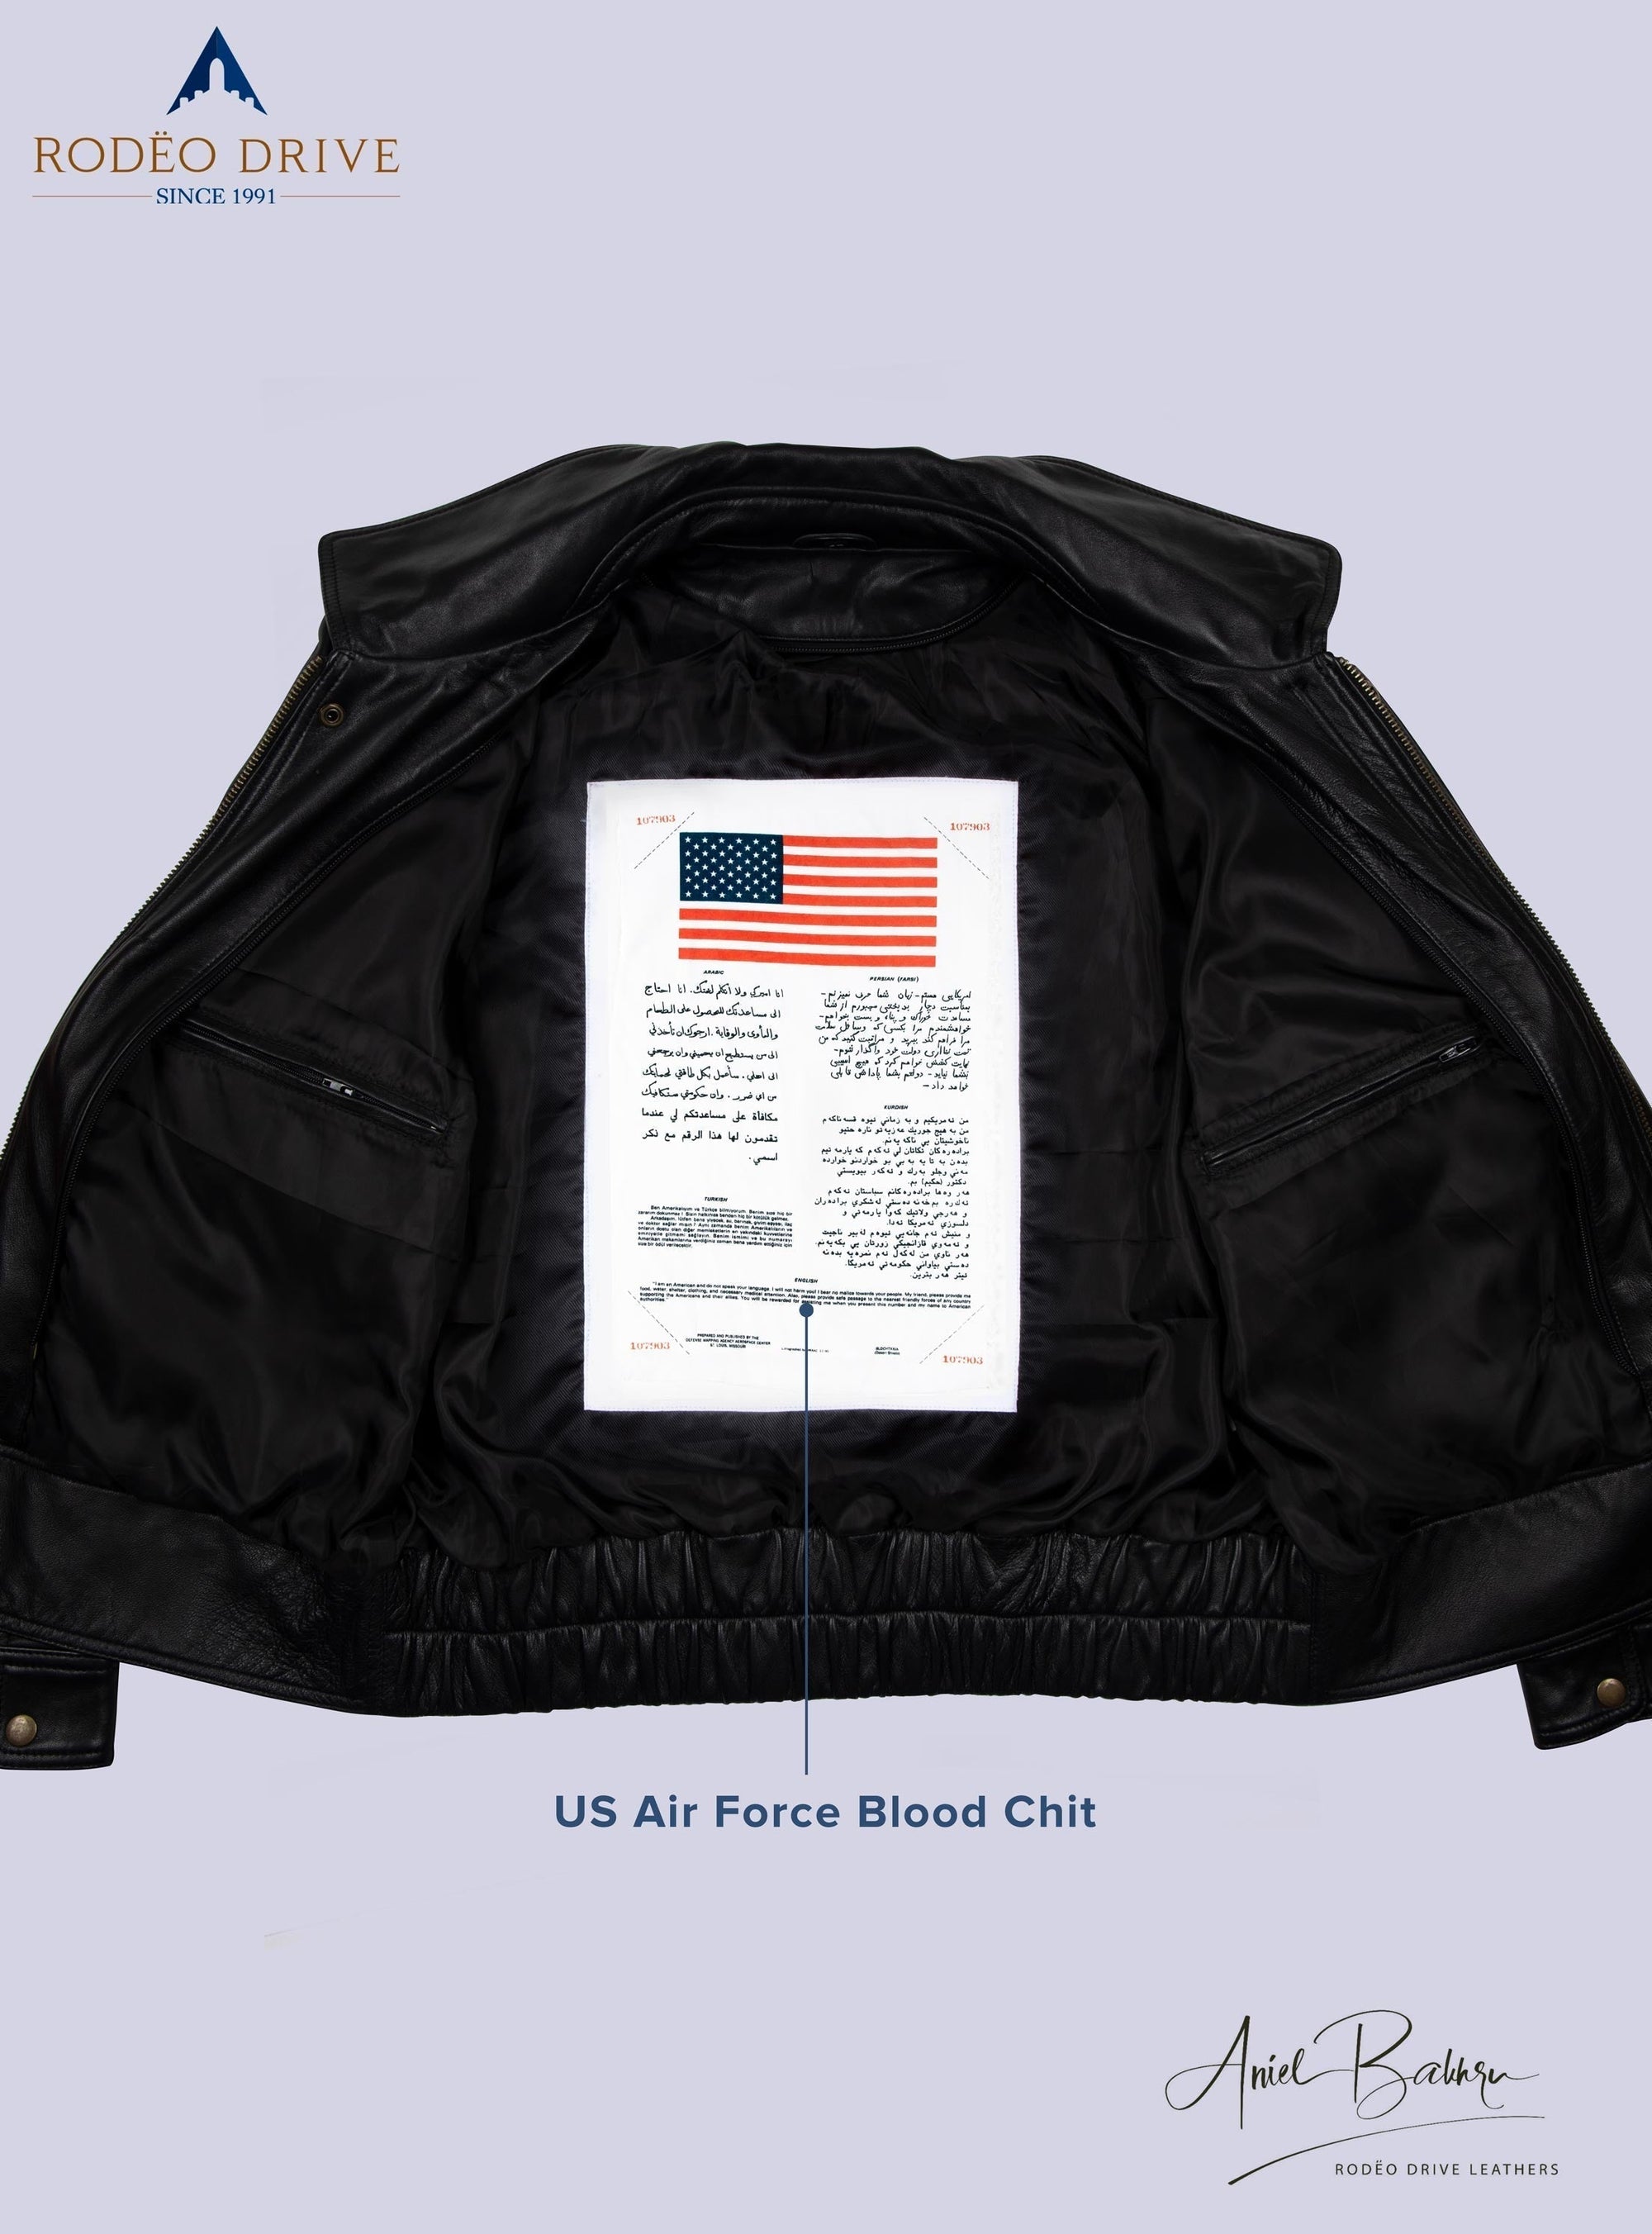 Inside image of united UNIFORM LEATHER JACKETS women with US Air force blood chit sewed inside.